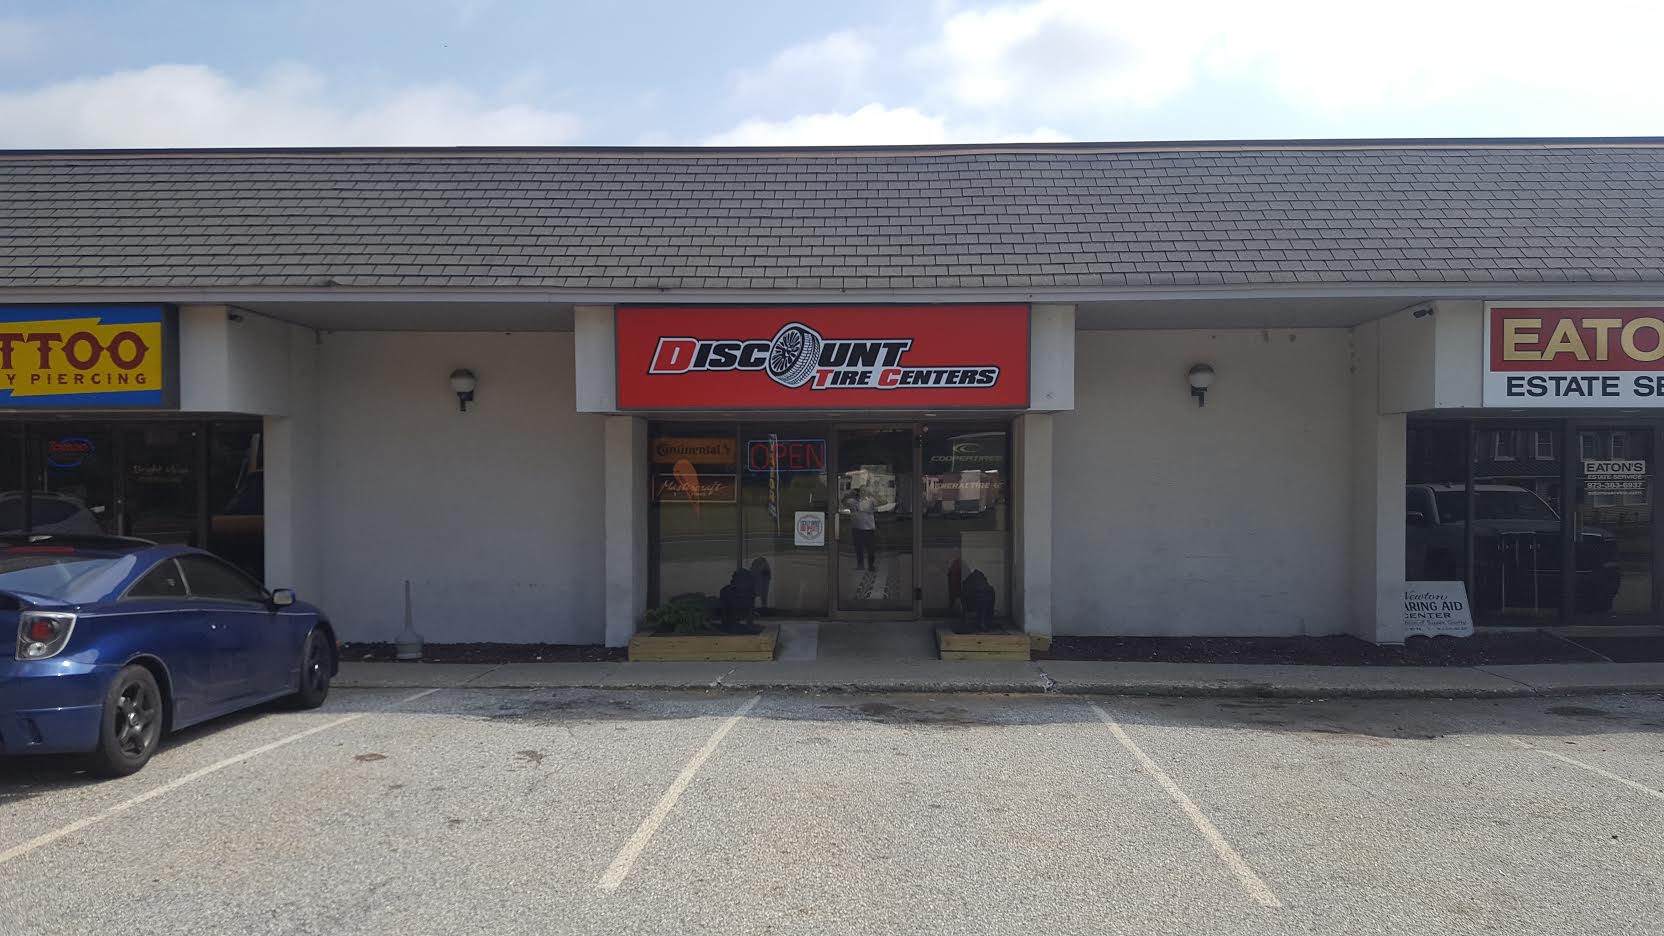 Discount Tire Centers